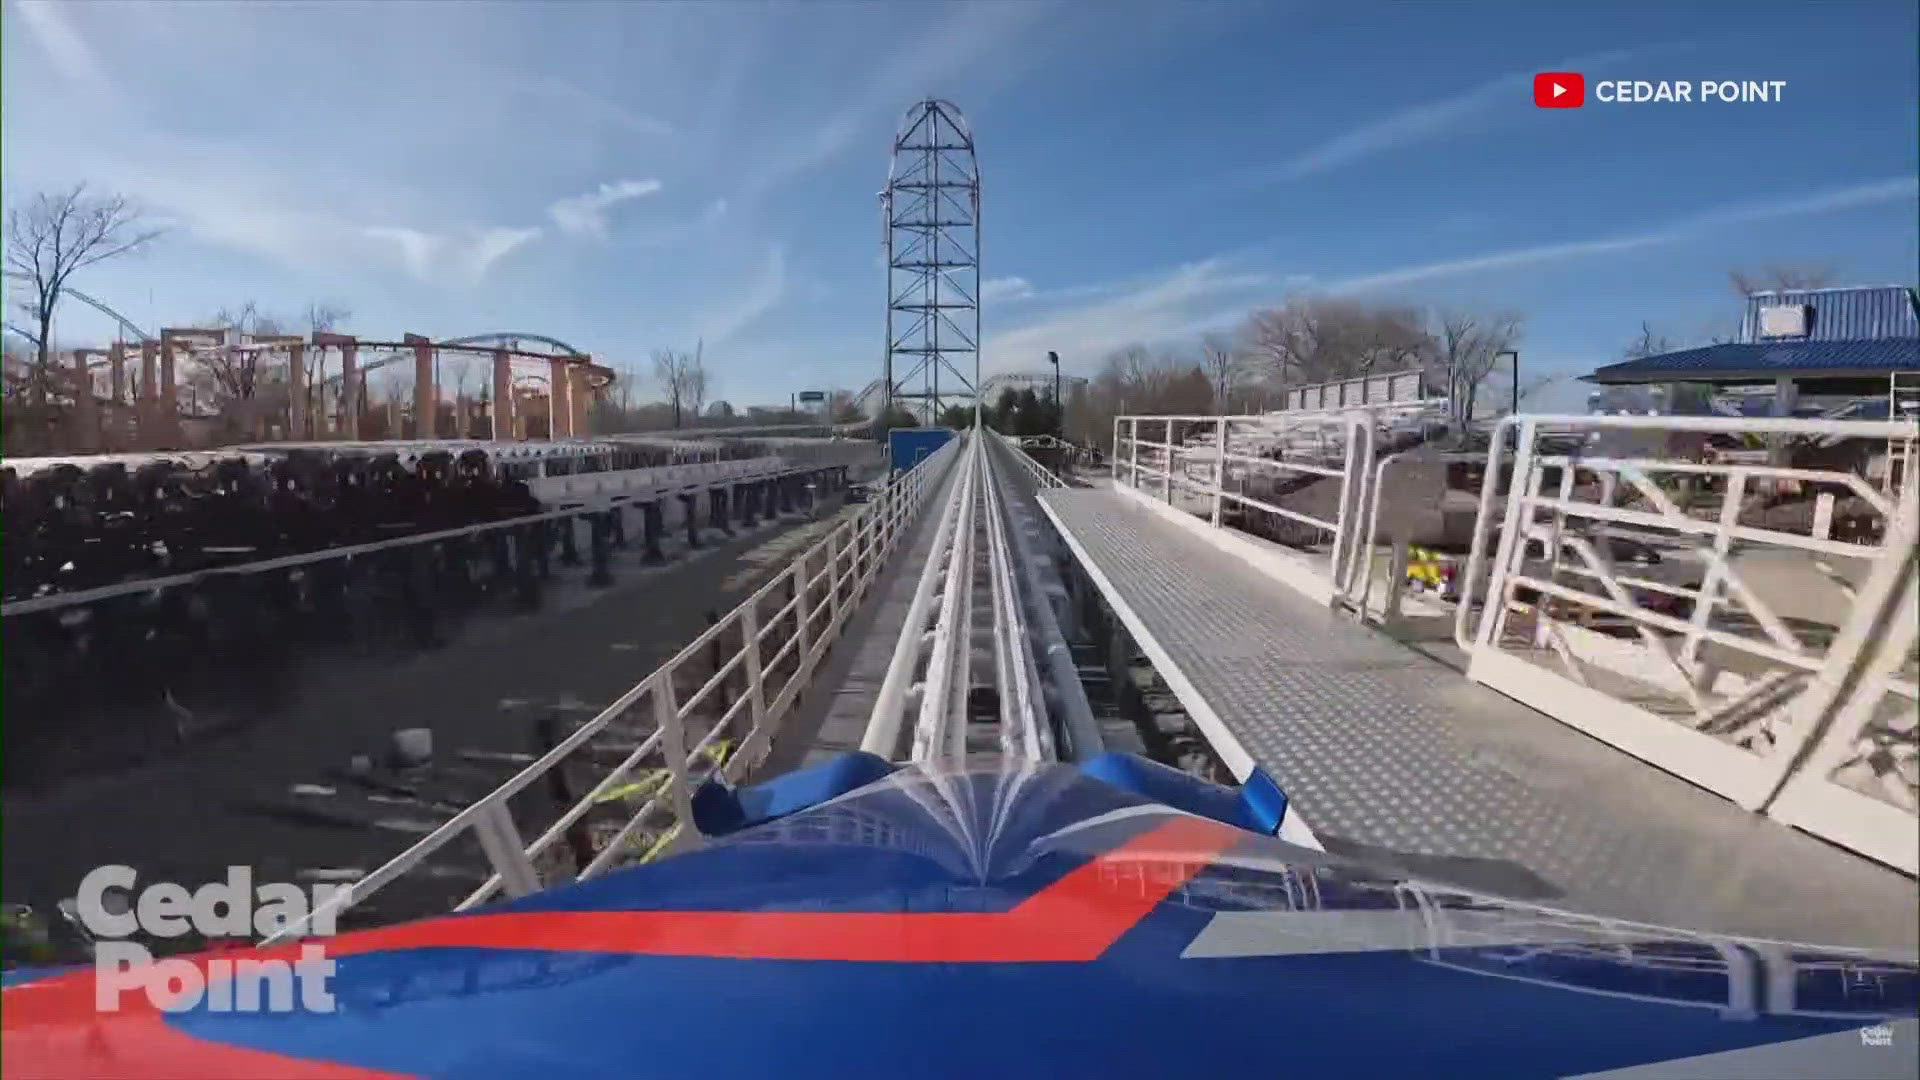 Cedar Point announced an 'extended closure' for Top Thrill 2 on May 12 for Zamperla, the ride's manufacturer, to make 'mechanical modifications' to coaster vehicles.